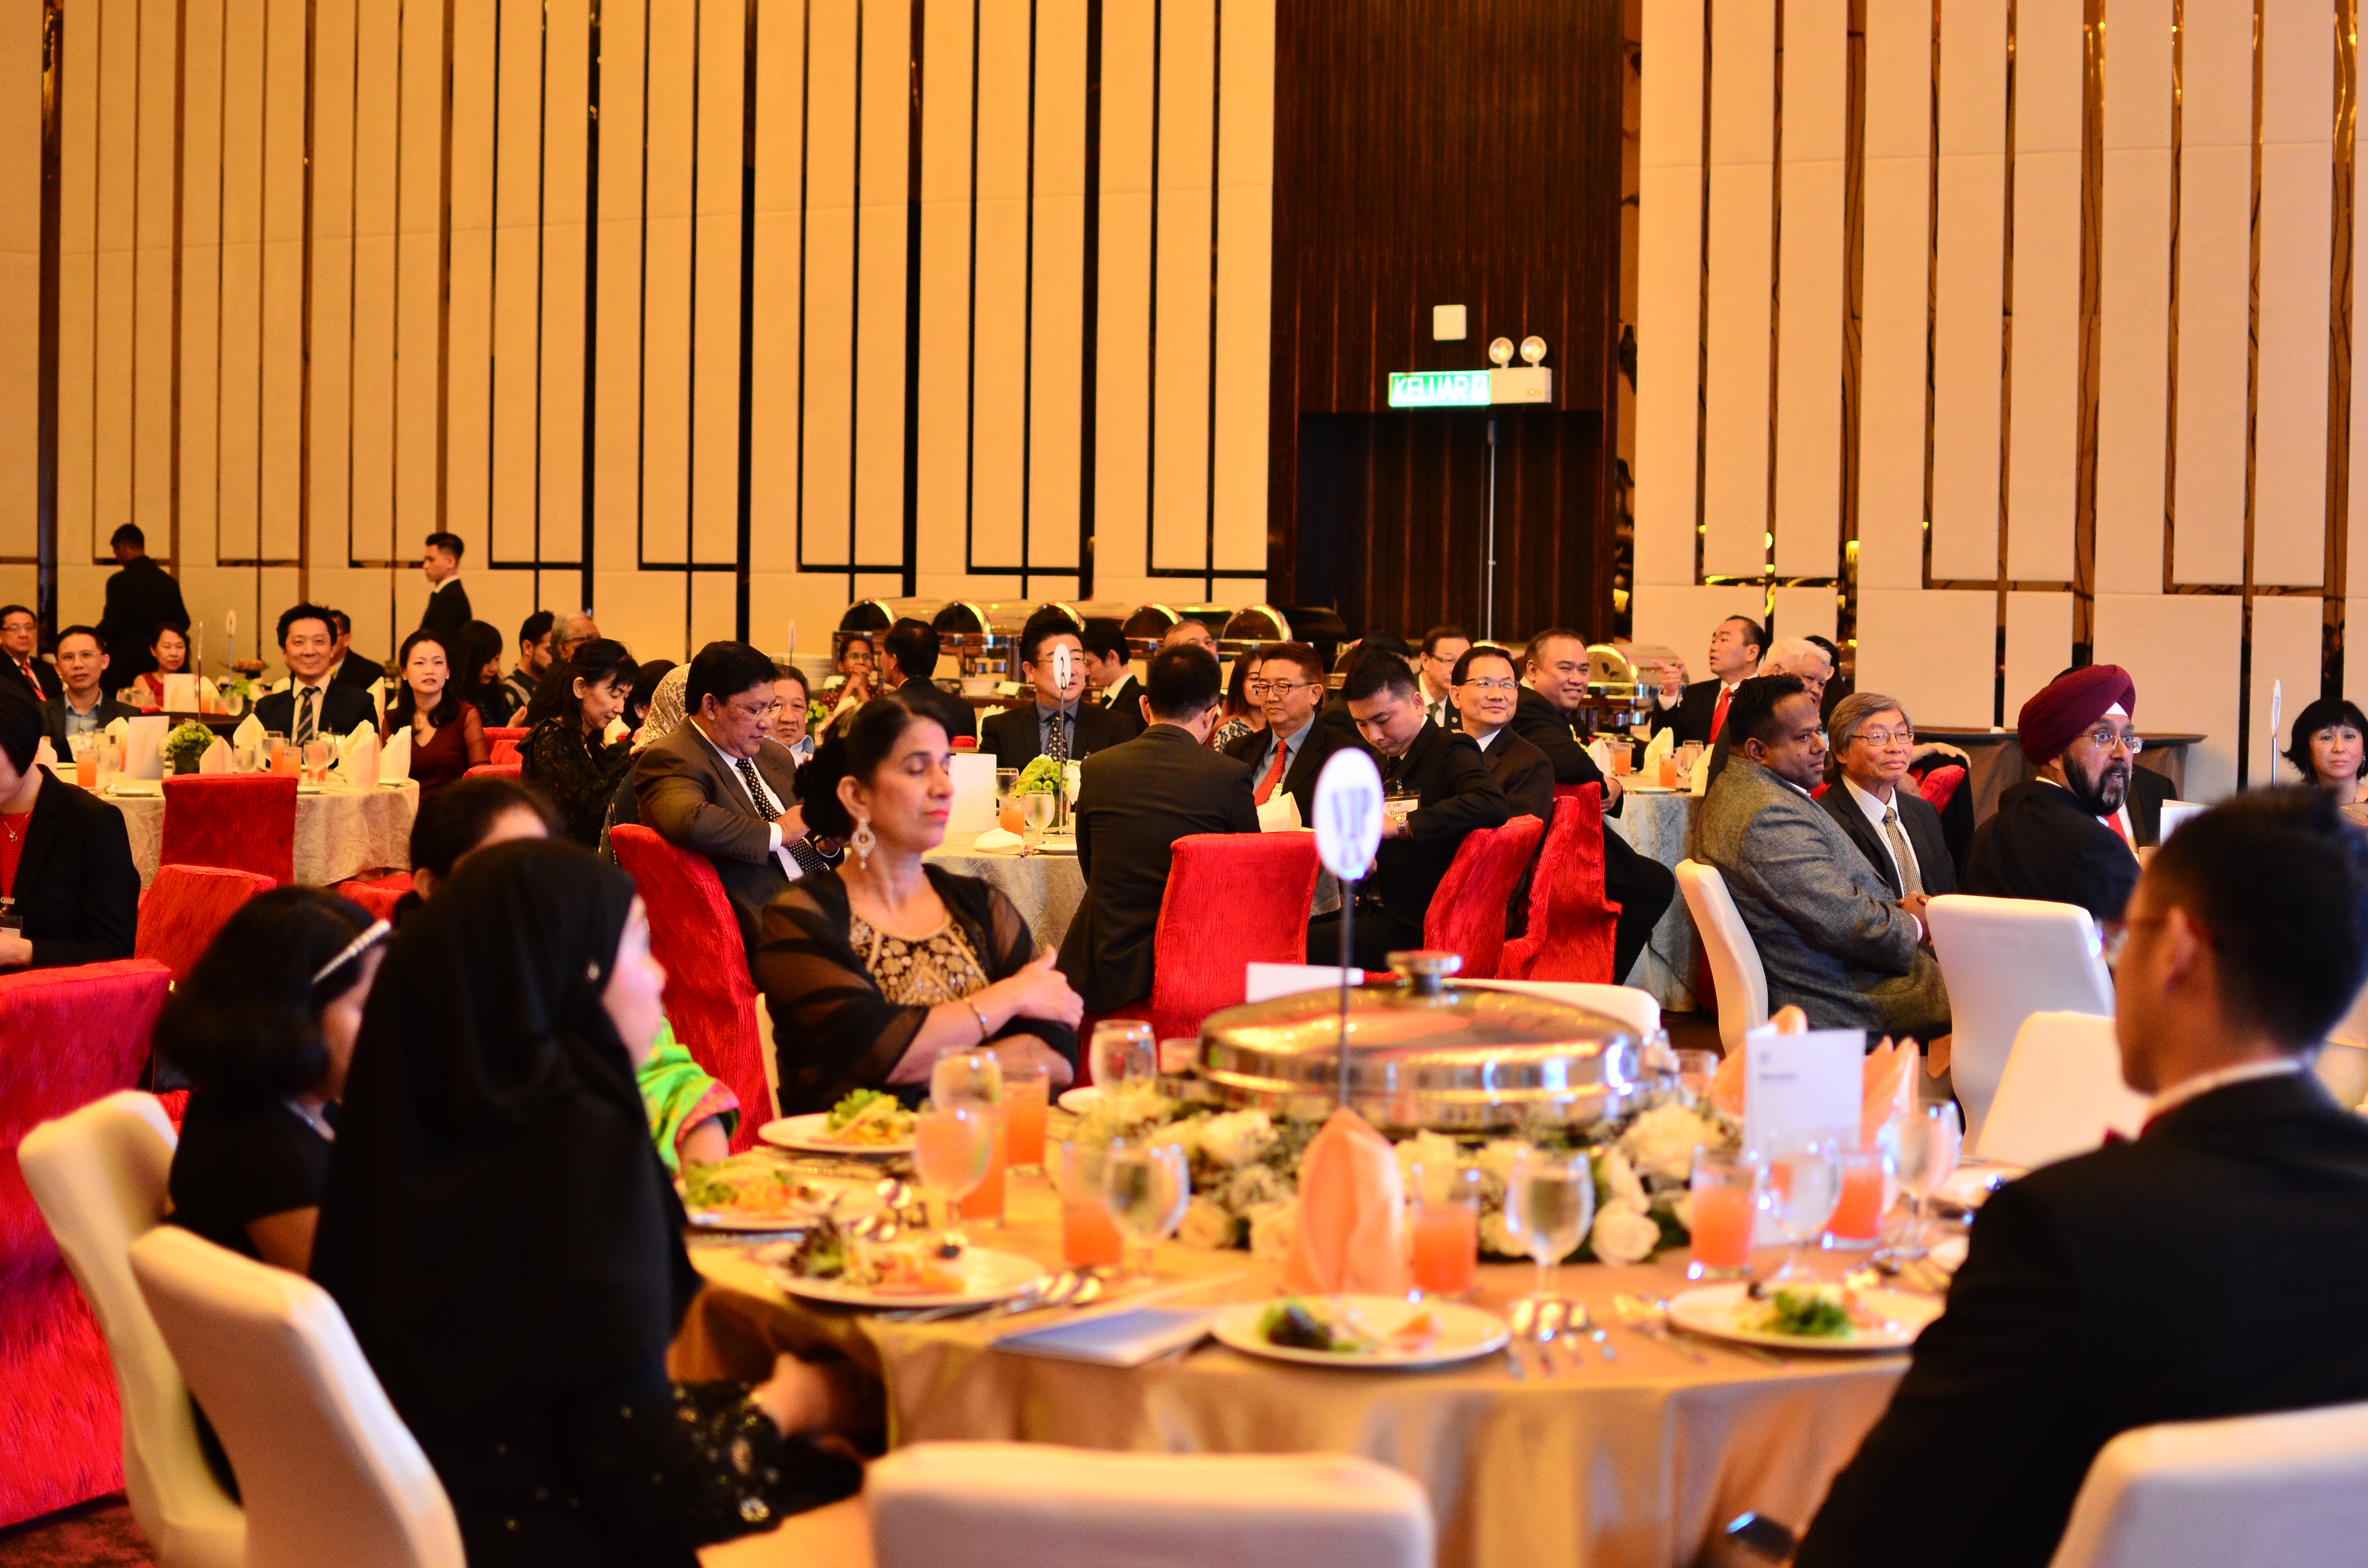 No graduate event in Malaysia is complete without a formal dinner.